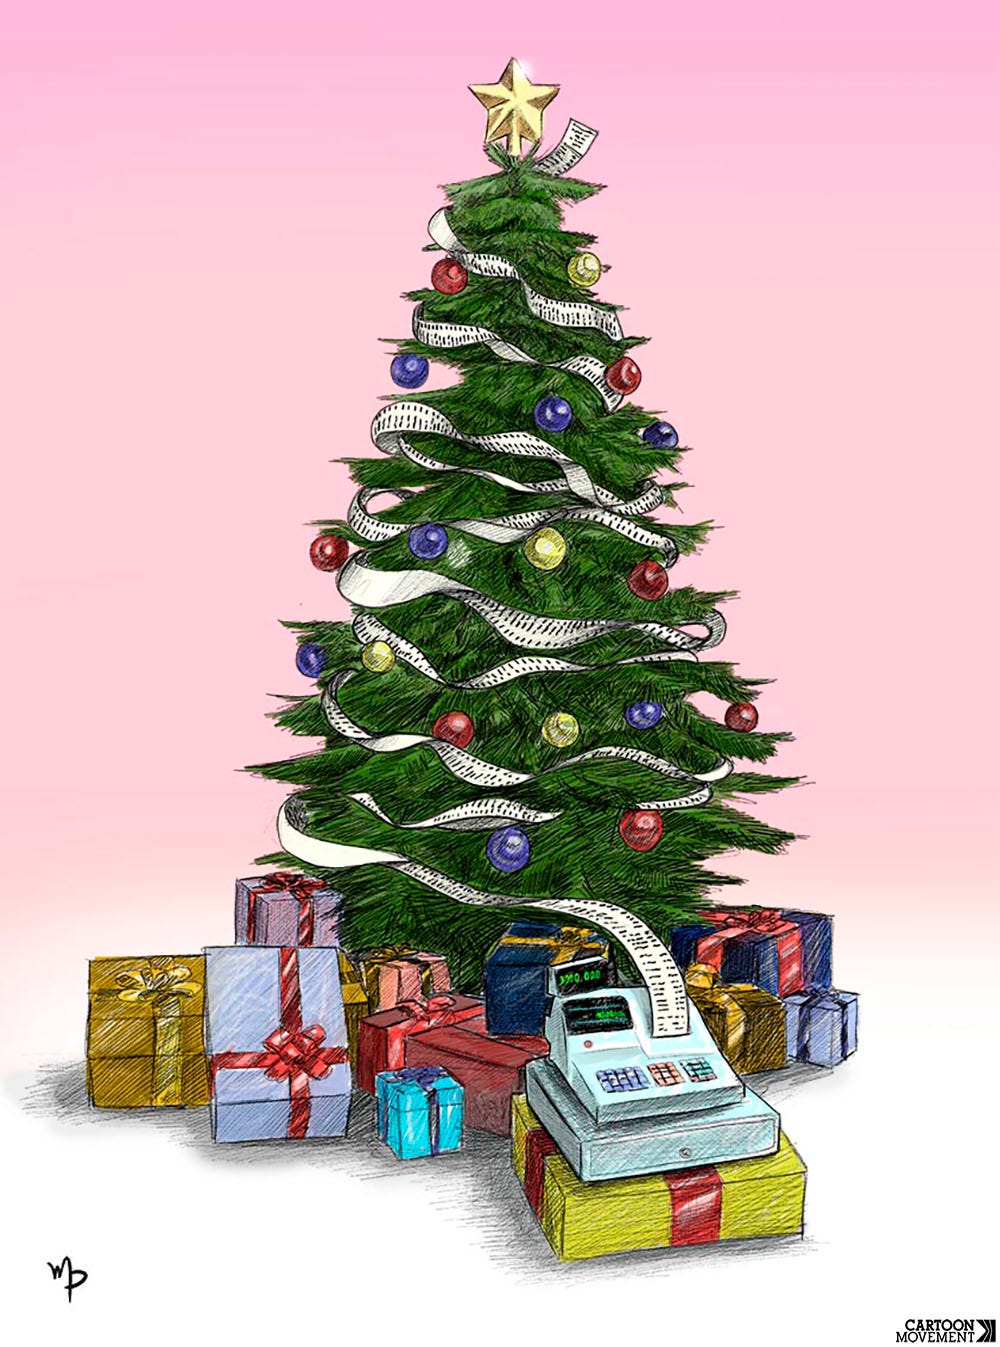 Cartoon showing a Christmas tree with presents beneath it. There is a cash register on one of the presents, spewing out a long, long receipt that is winding around the Christmas tree like a garland.